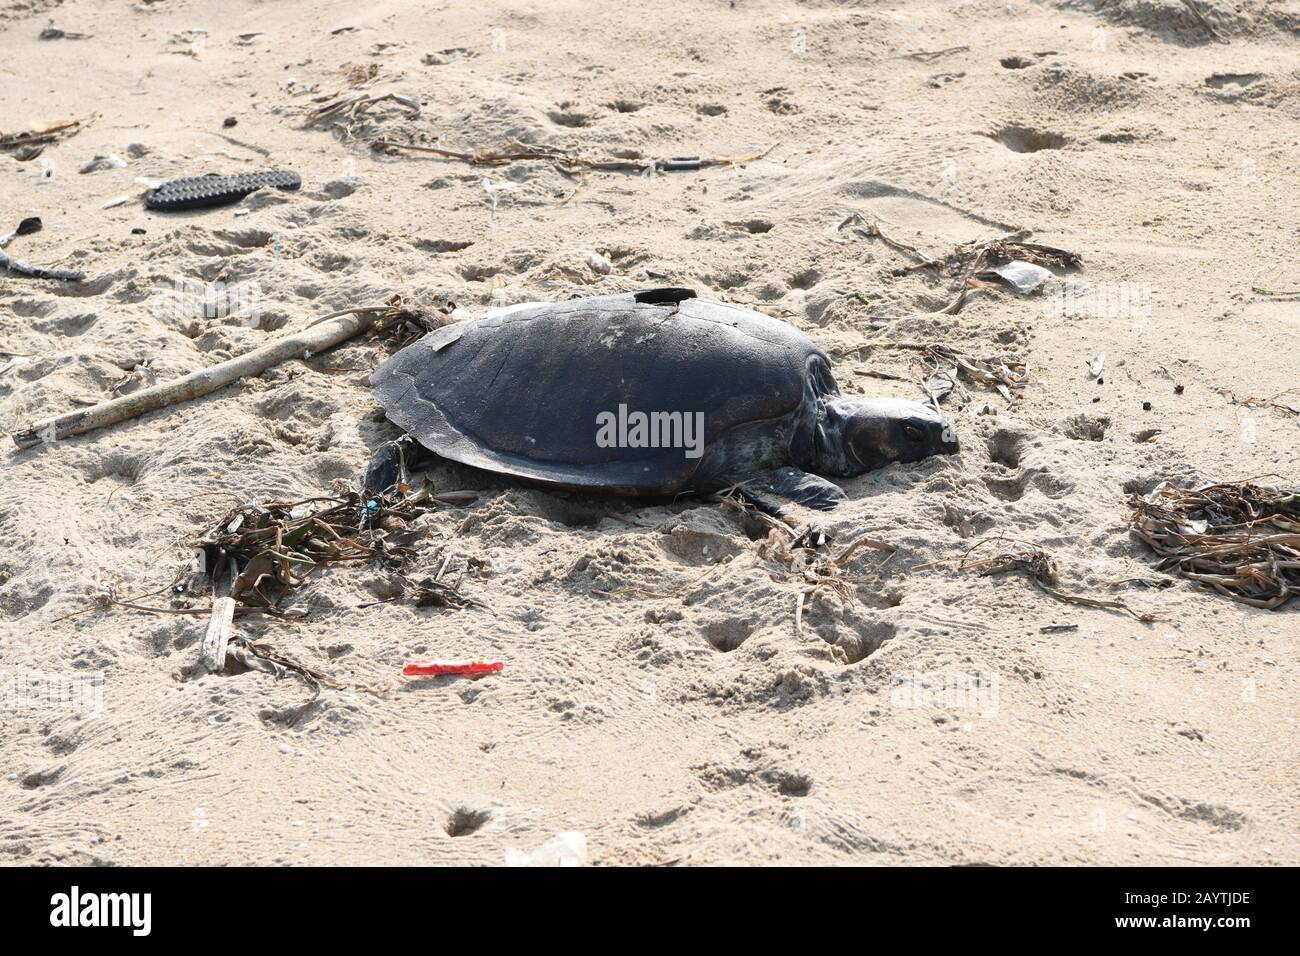 Dead Turtle. Caught, entangled then drowned in fishing nets then dumped or washed up on the beach. Southern India Stock Photo